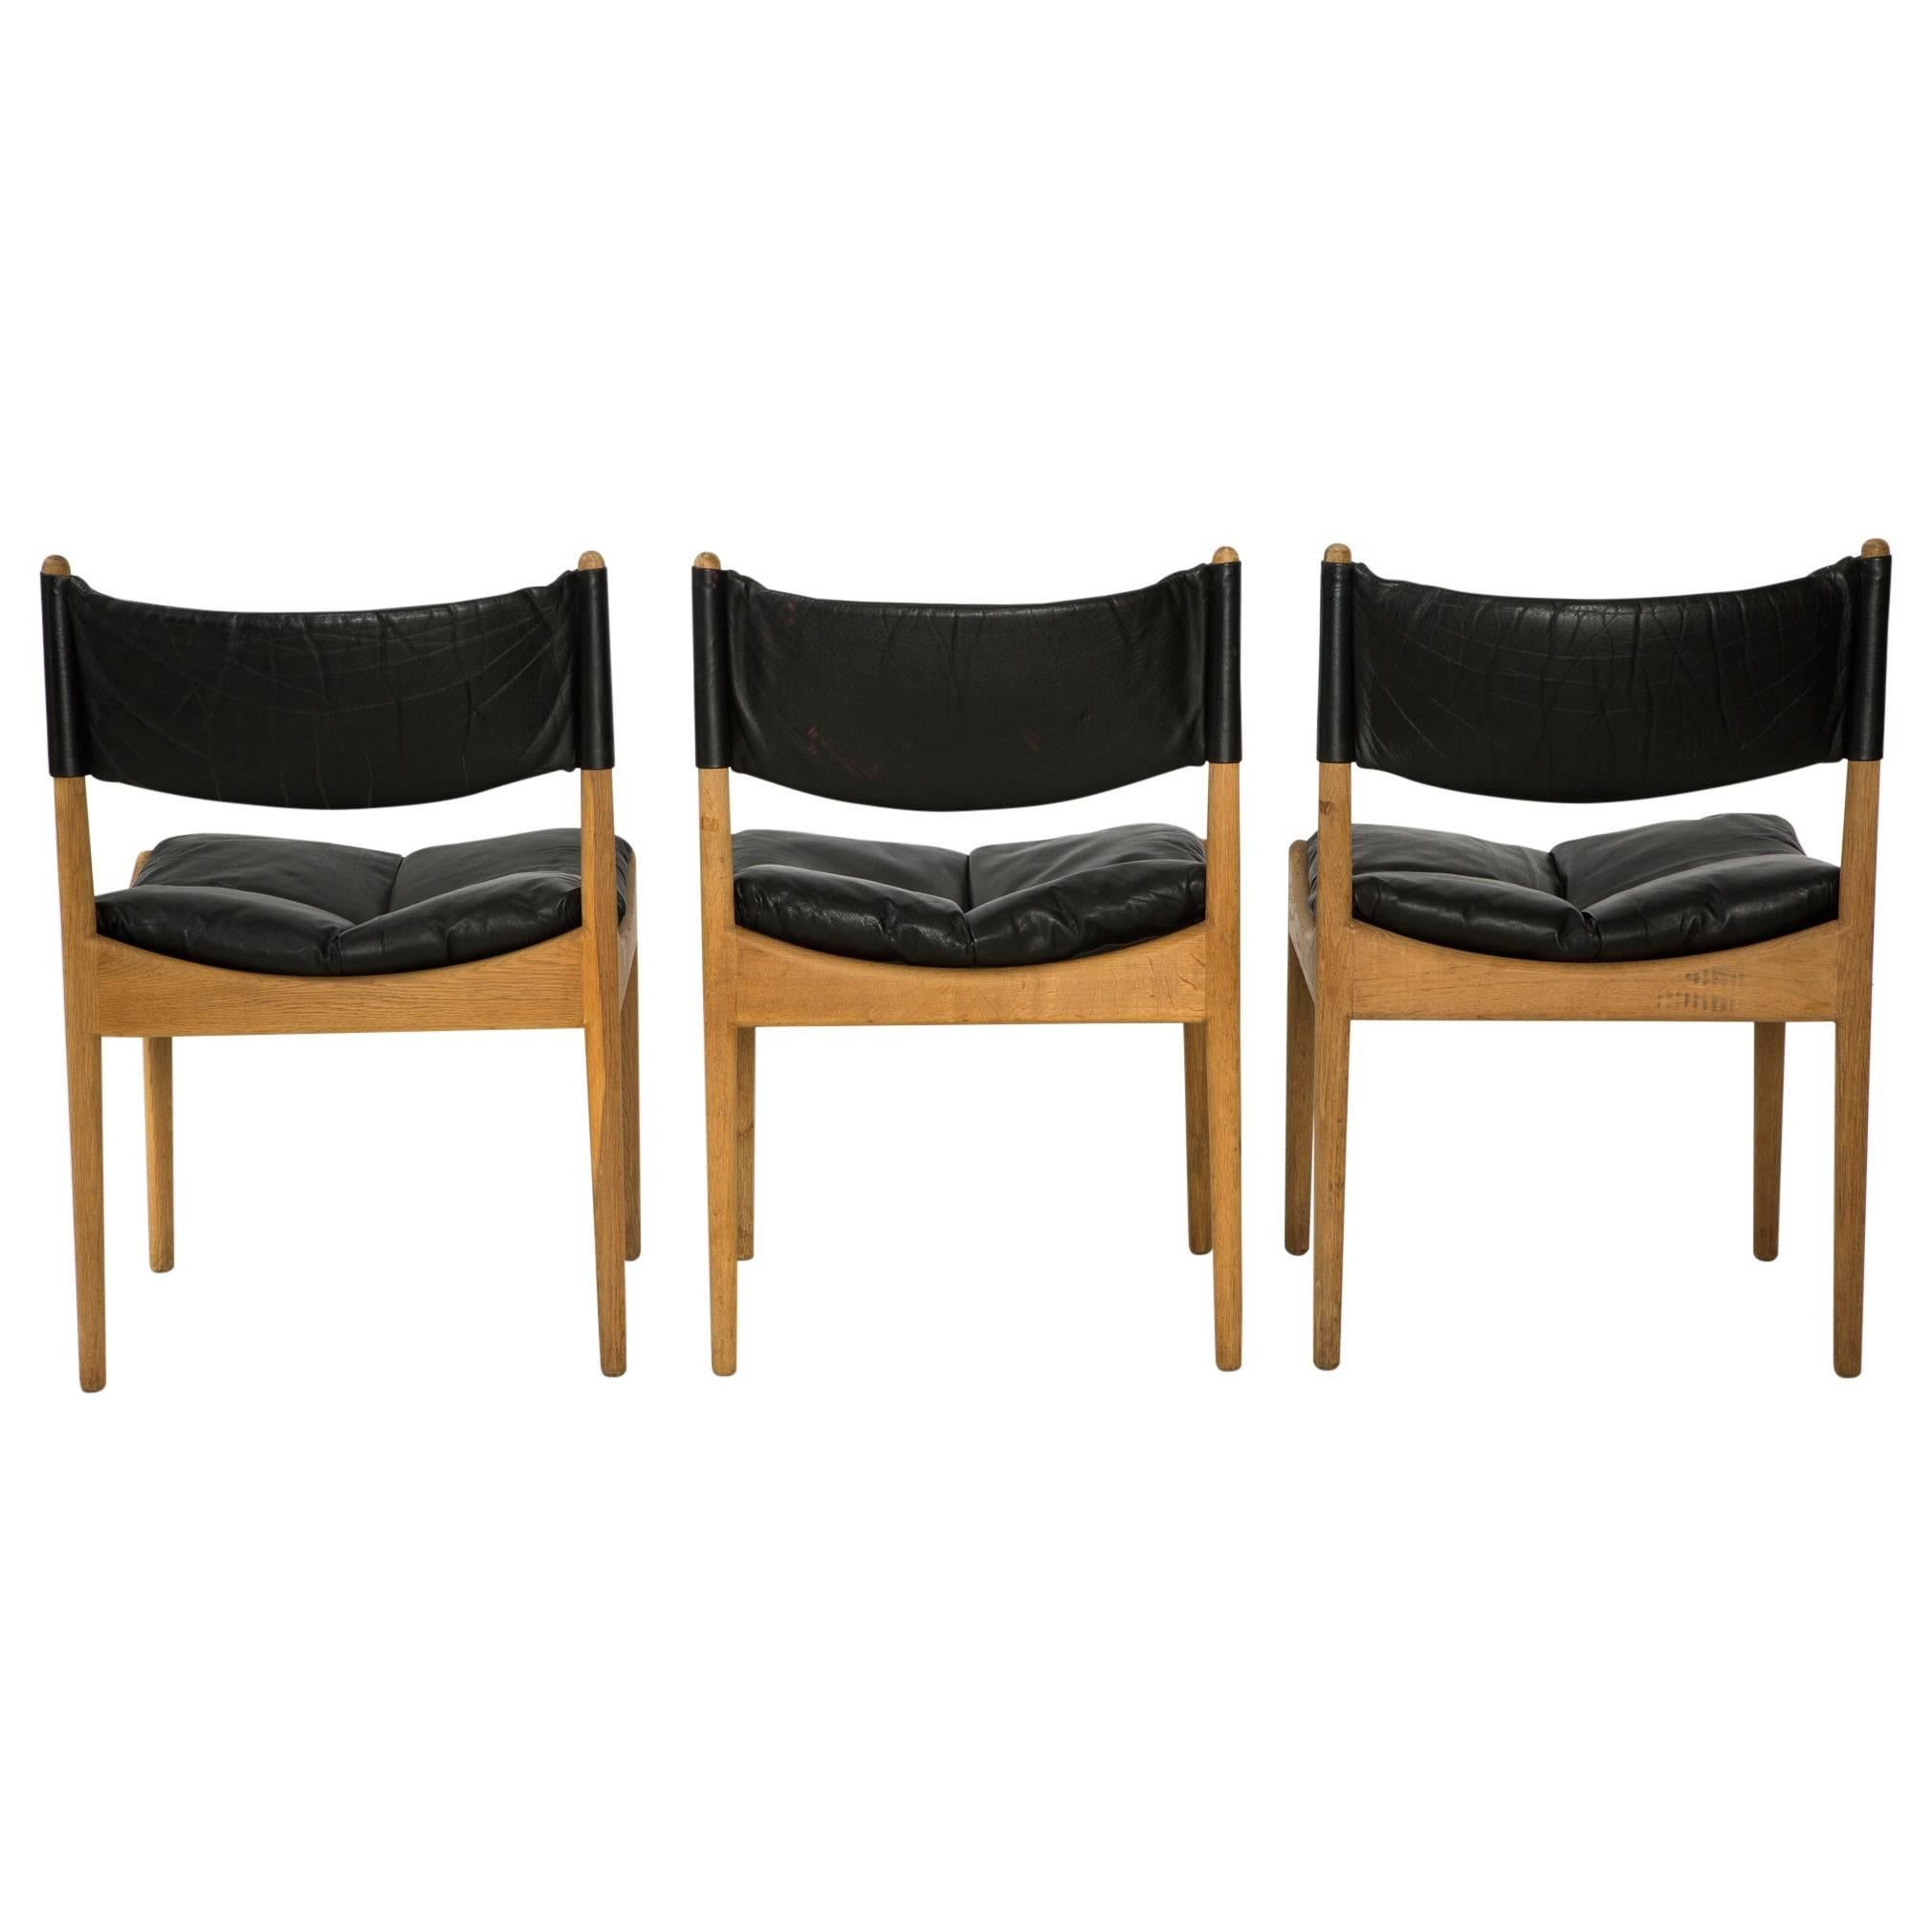 Mid-20th Century *ON SALE* Oak and Leather 'Modus' Dining Chairs by Kristian Solmer Vedel